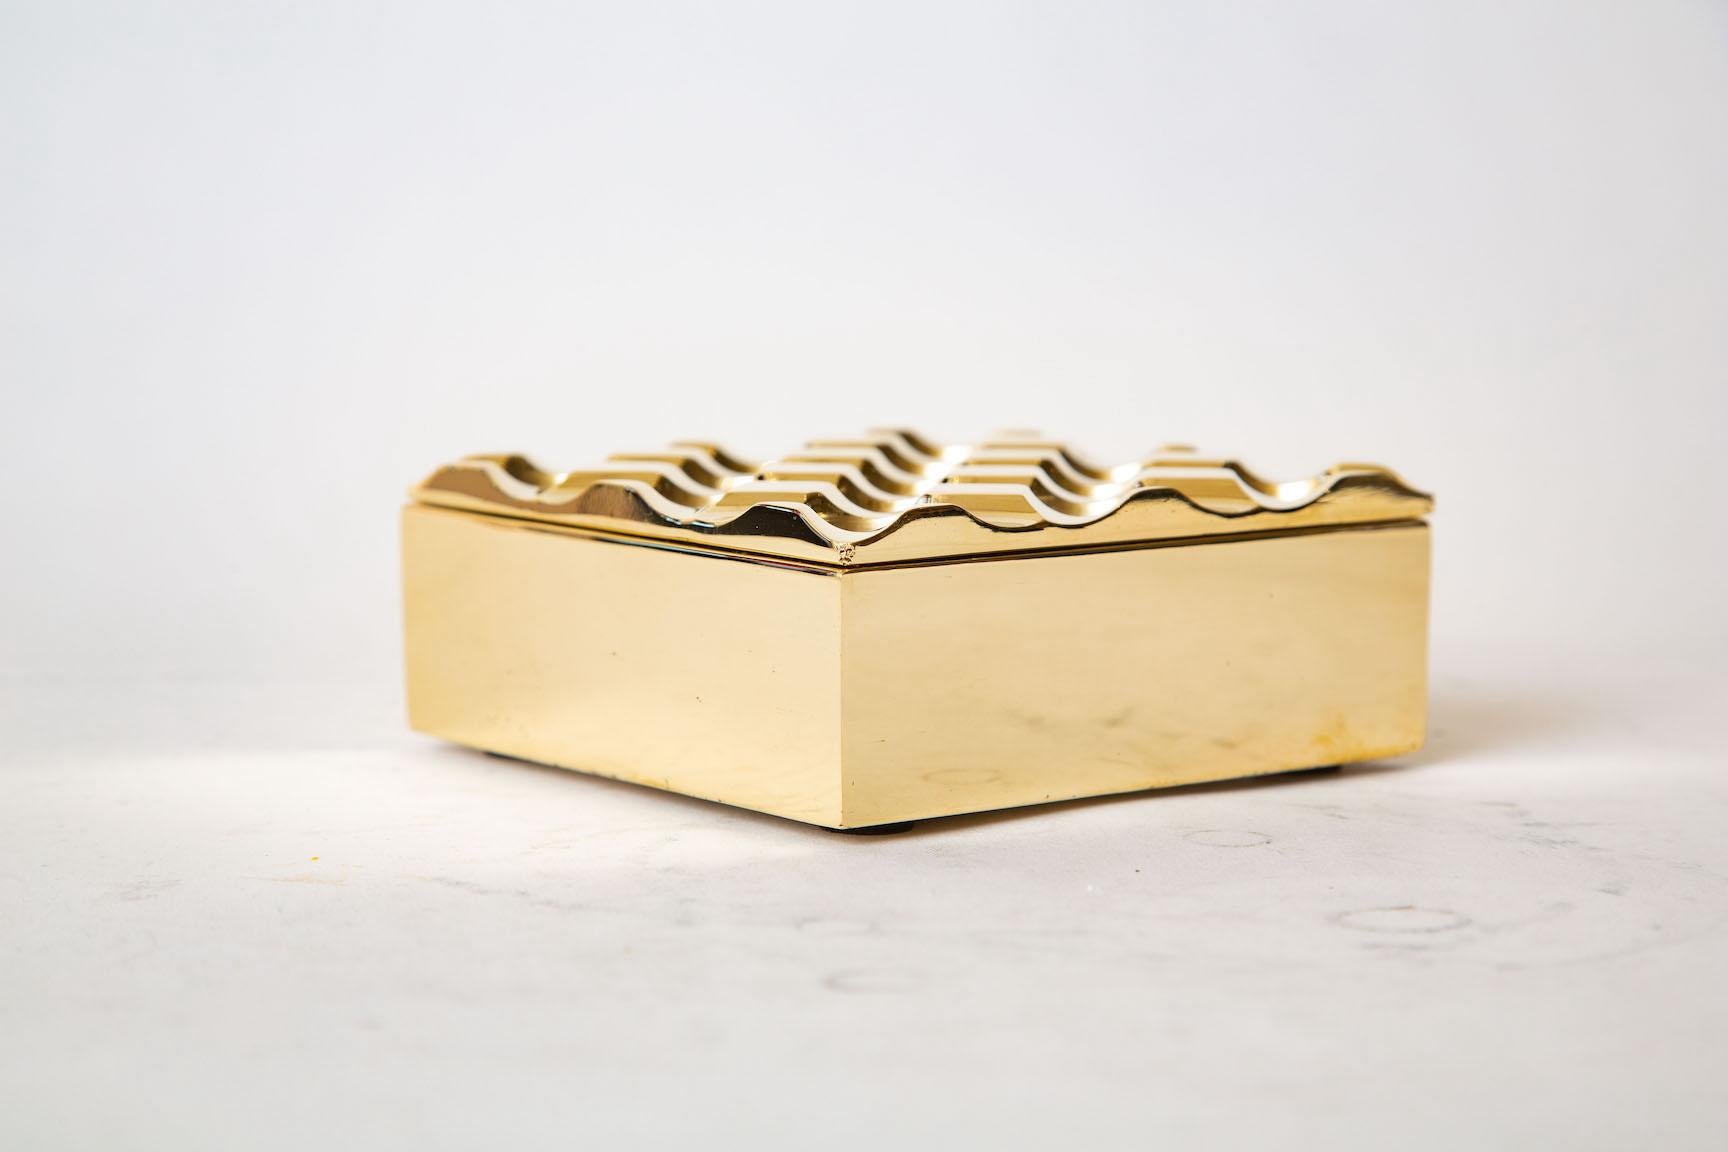 Late 20th Century Solid Brass Ashtray or Desk Accessory by Backstrom Holger & Bo Ljungberg Sweden